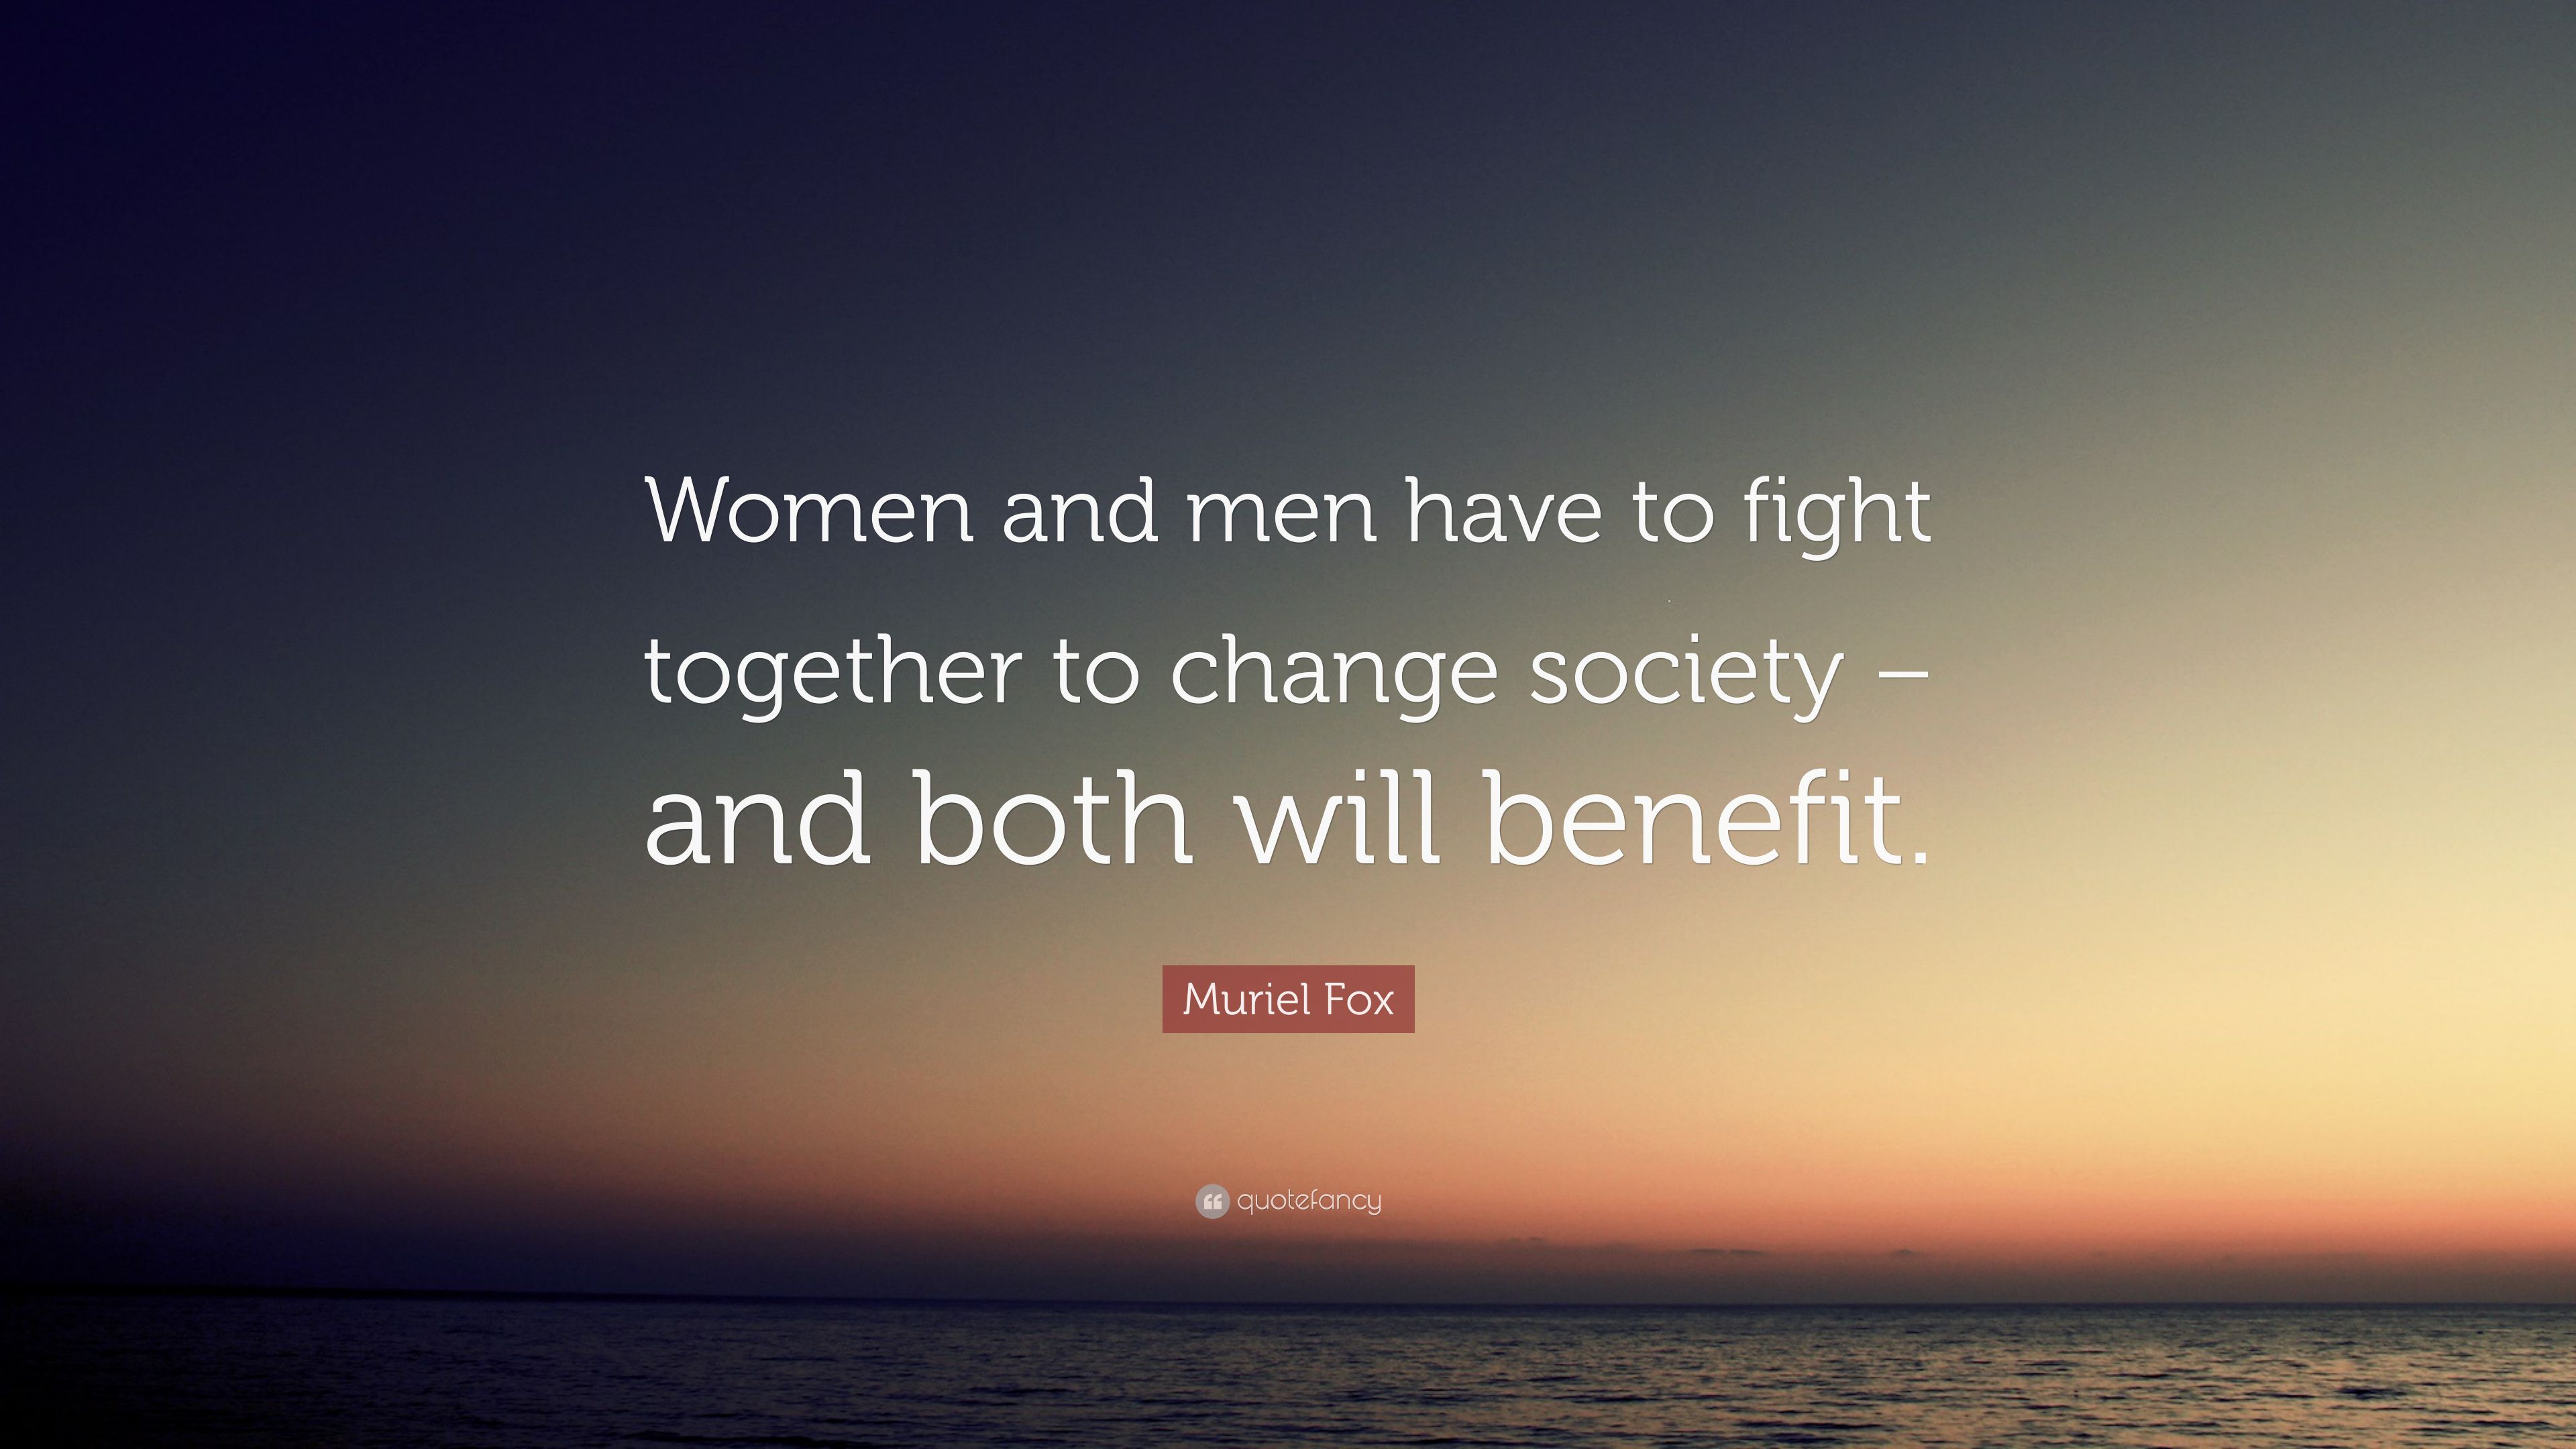 Muriel Fox Quote: “Women and men have to fight together to change society